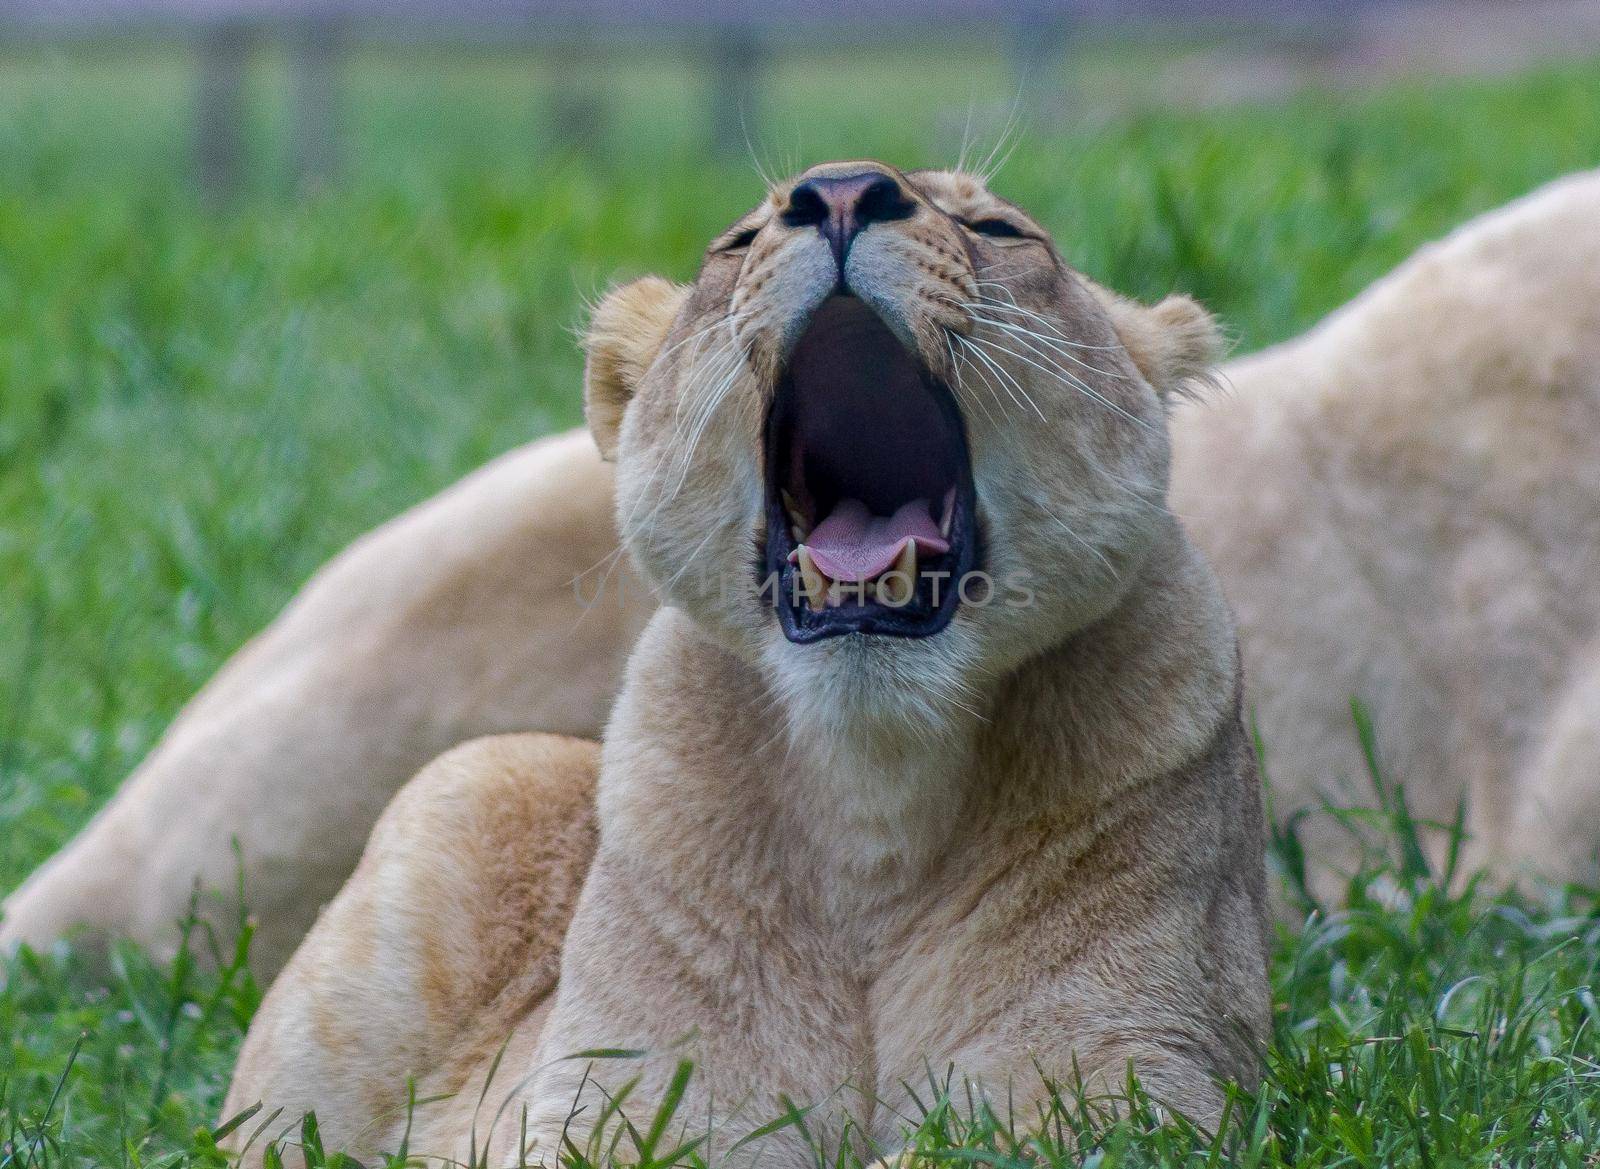 Female lion yawning in an zoo, Australia by bettercallcurry